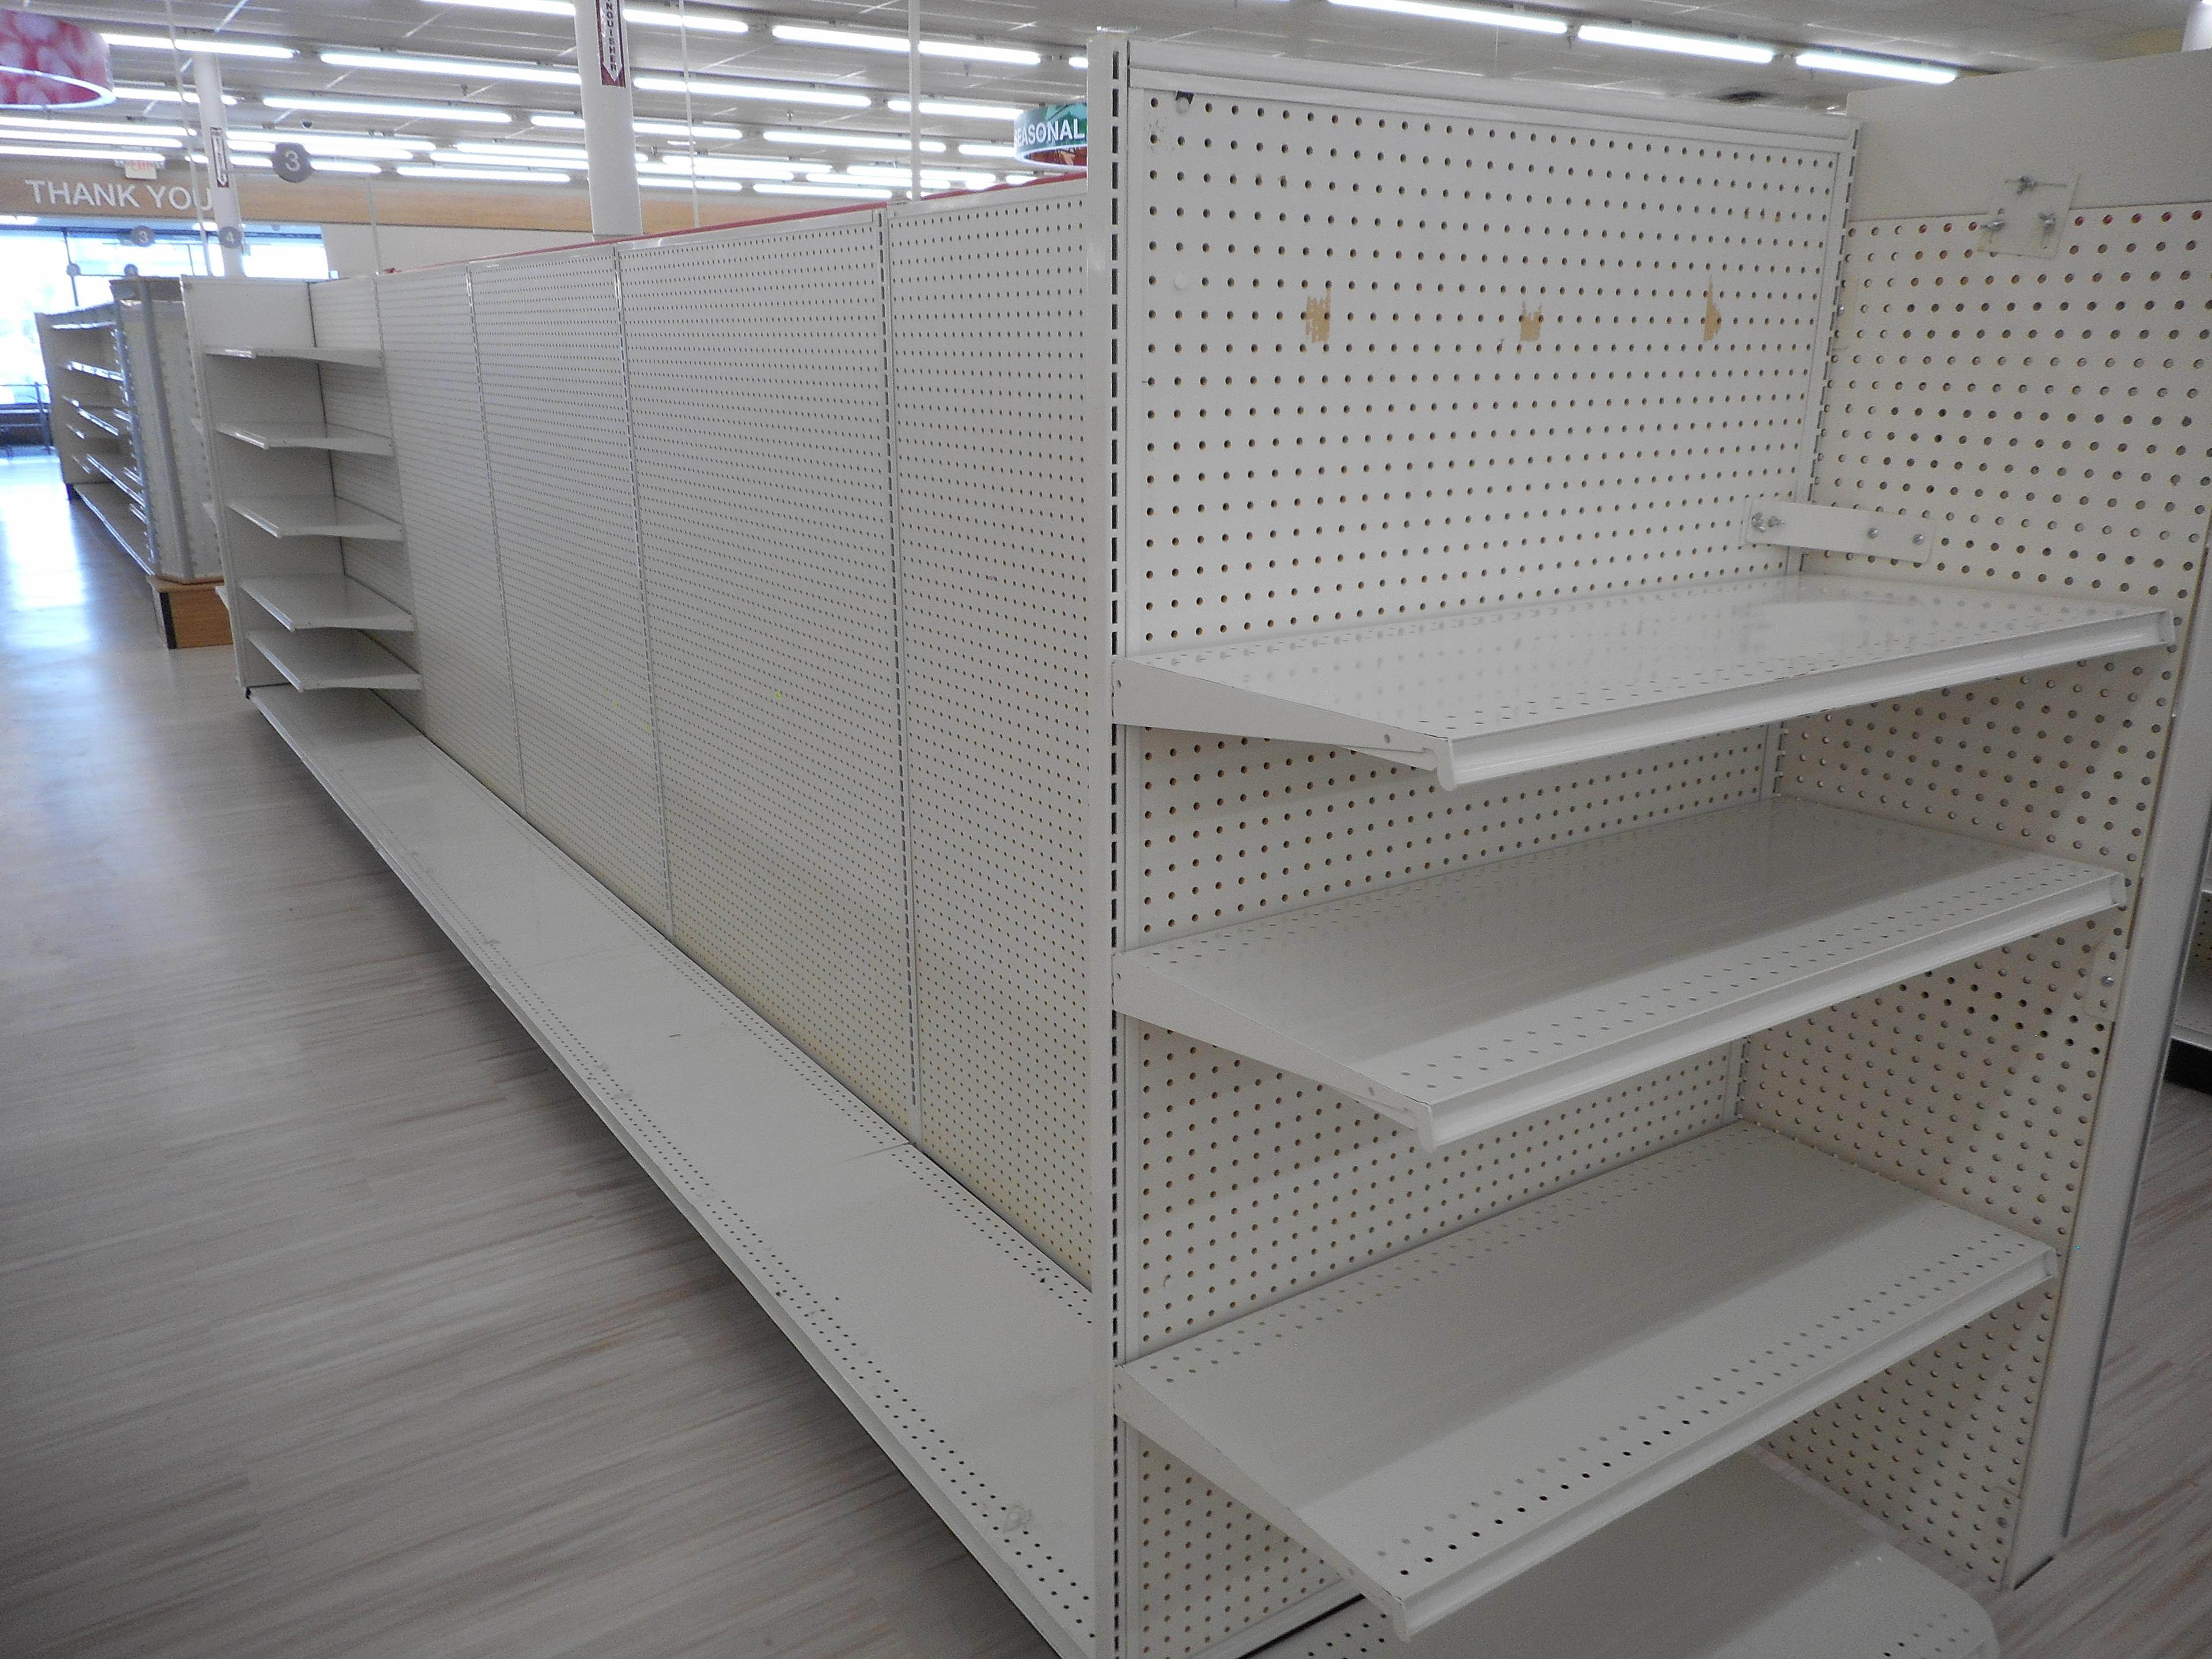 26 FT 2-SIDED WHITE SHELVING WITH 2 END CAPS (PRICED PER FOOT) 60 INCHES TA